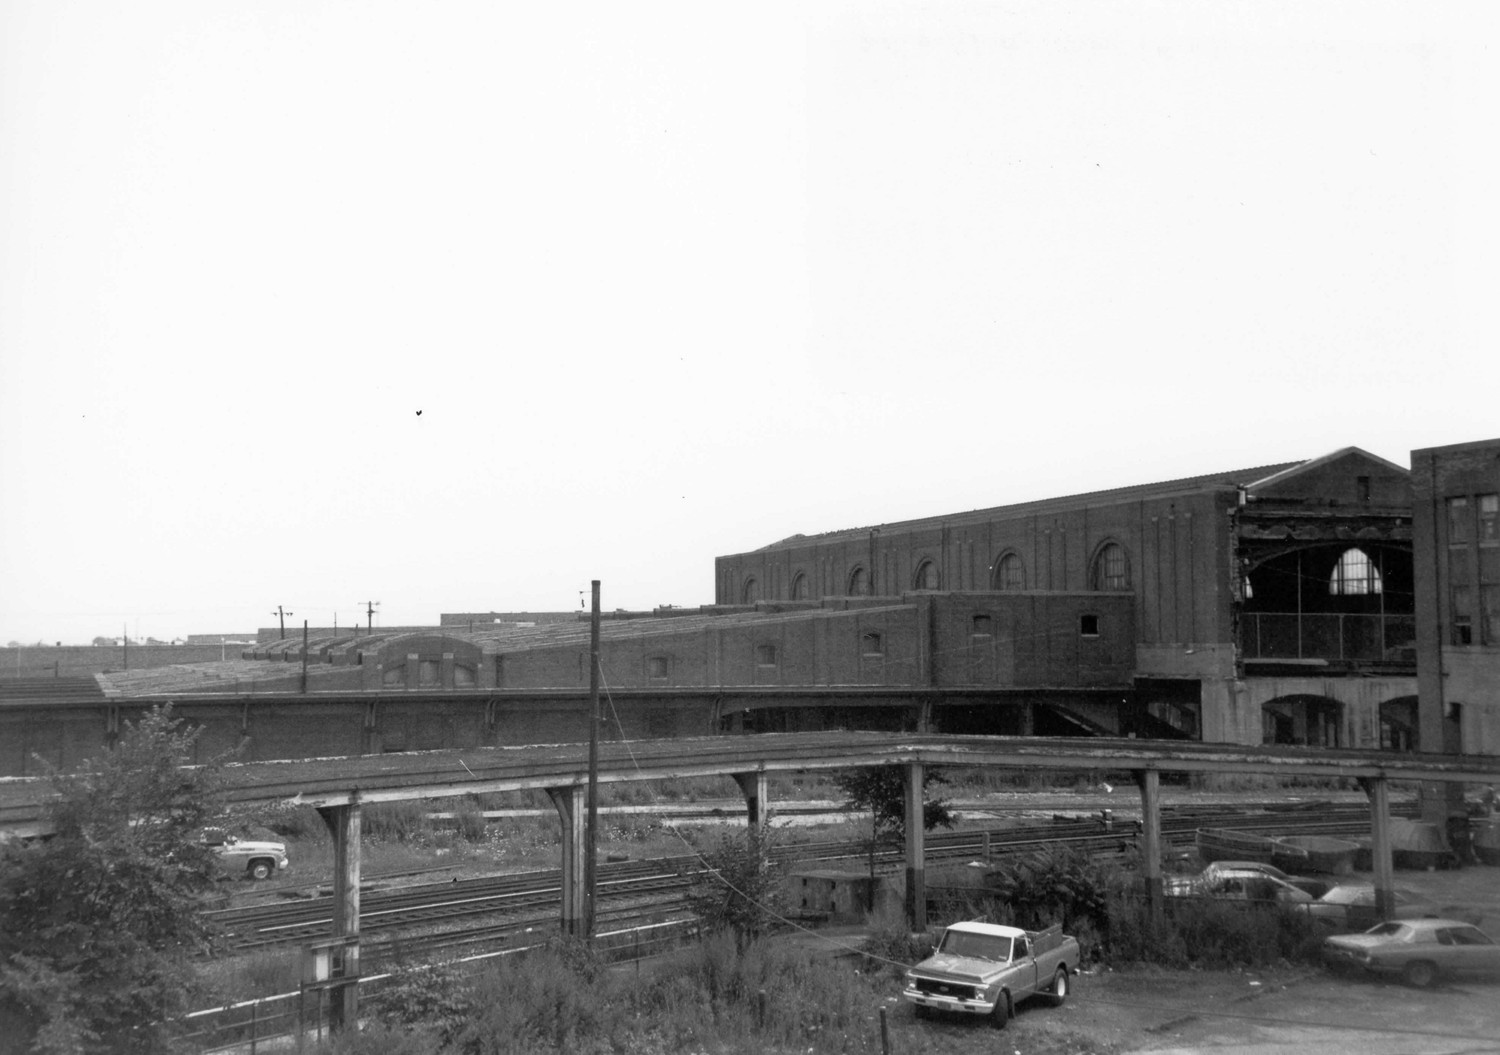 New York Central Terminal, Buffalo New York View of Train Platforms showing demolition of Connecting Wing (1983)